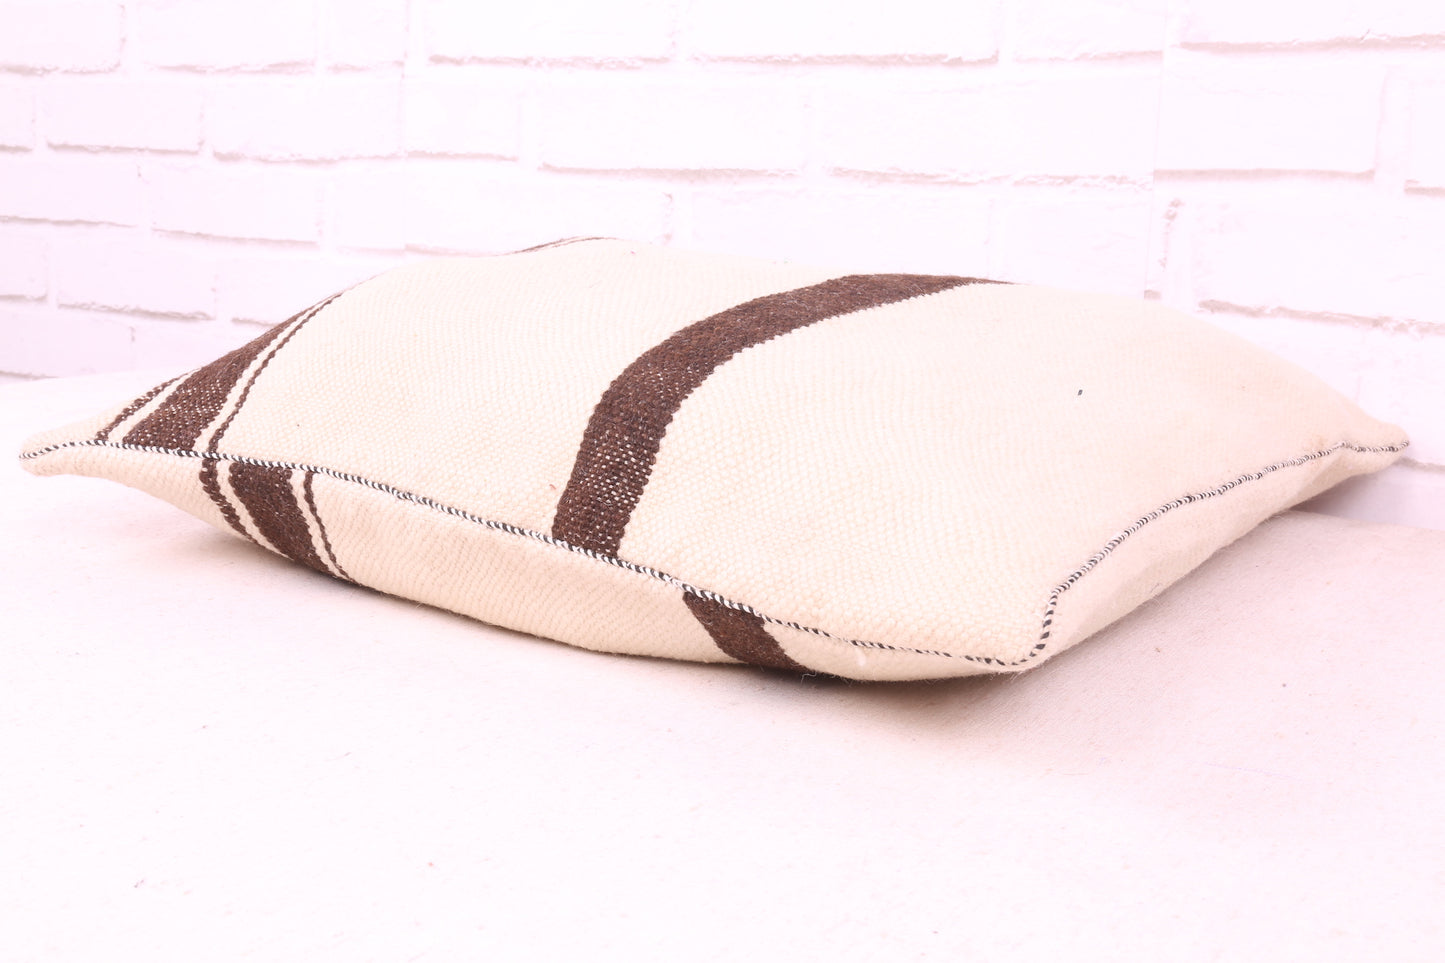 Moroccan berber pillow 17.7 inches X 18.5 inches